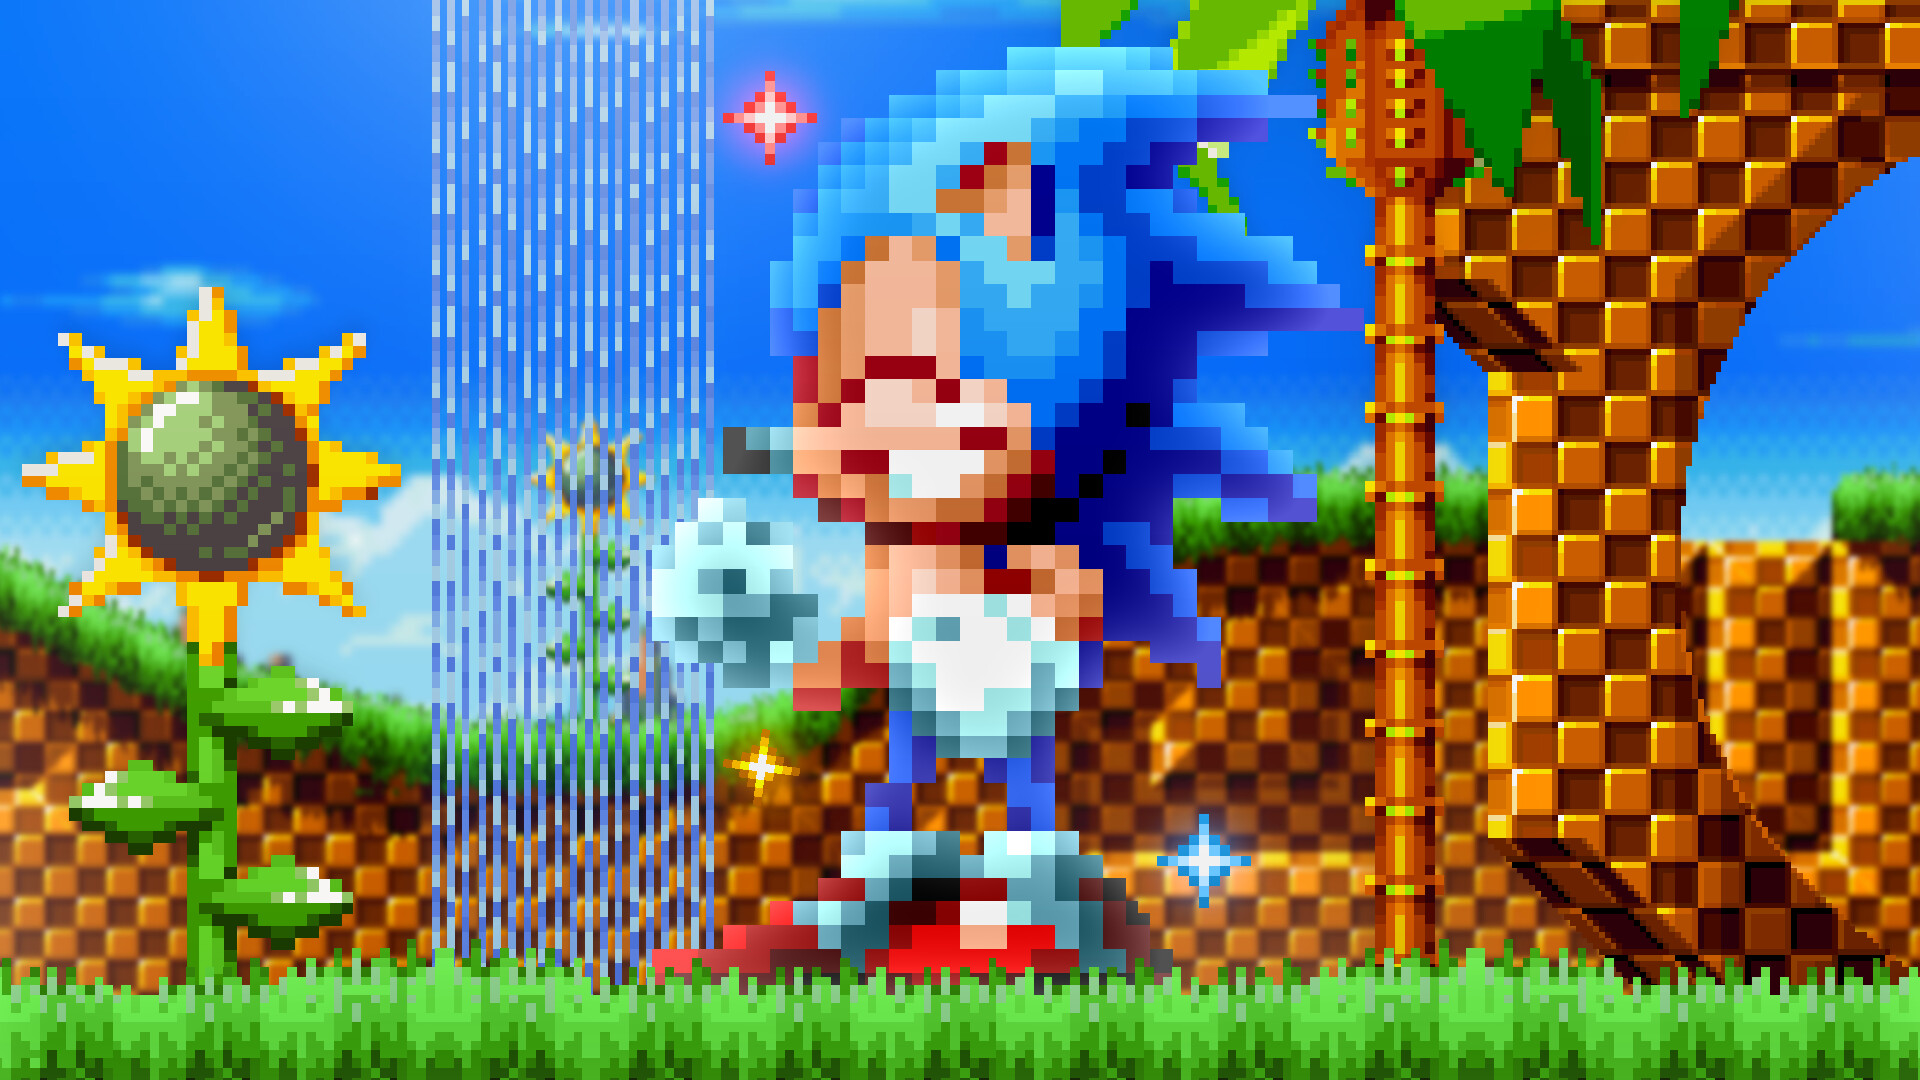 Custom / Edited - Sonic the Hedgehog Customs - Green Hill Zone - The  Spriters Resource